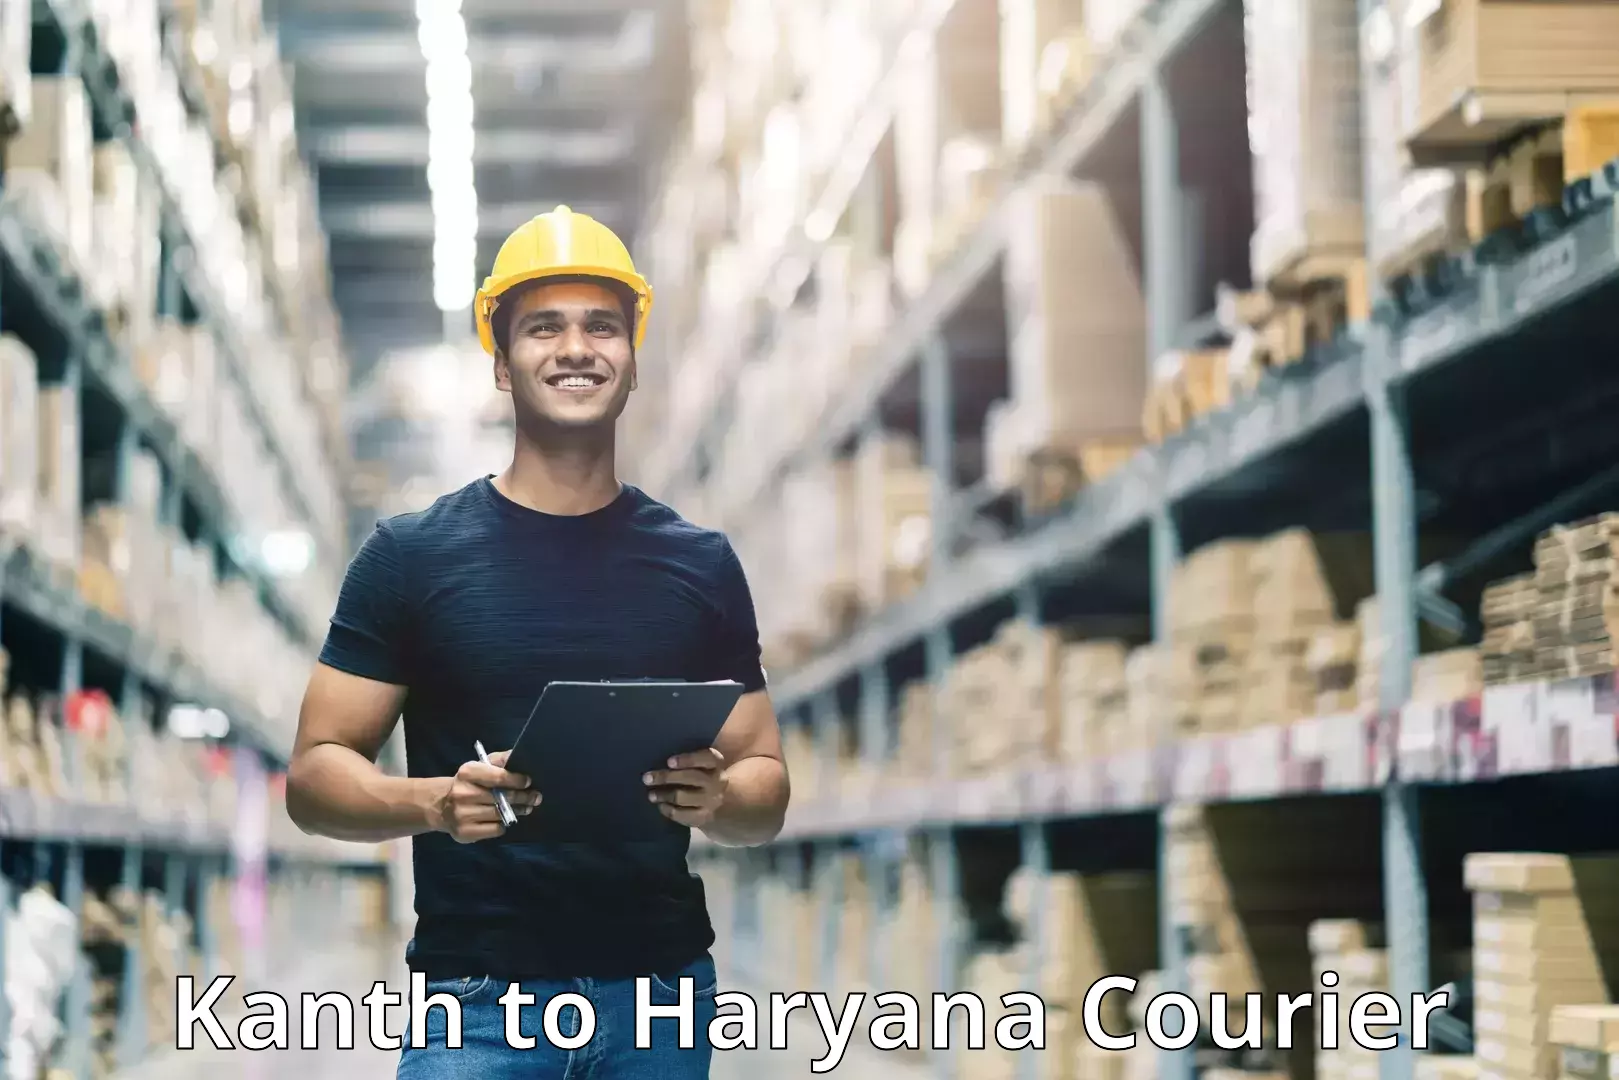 Tailored shipping services in Kanth to NCR Haryana